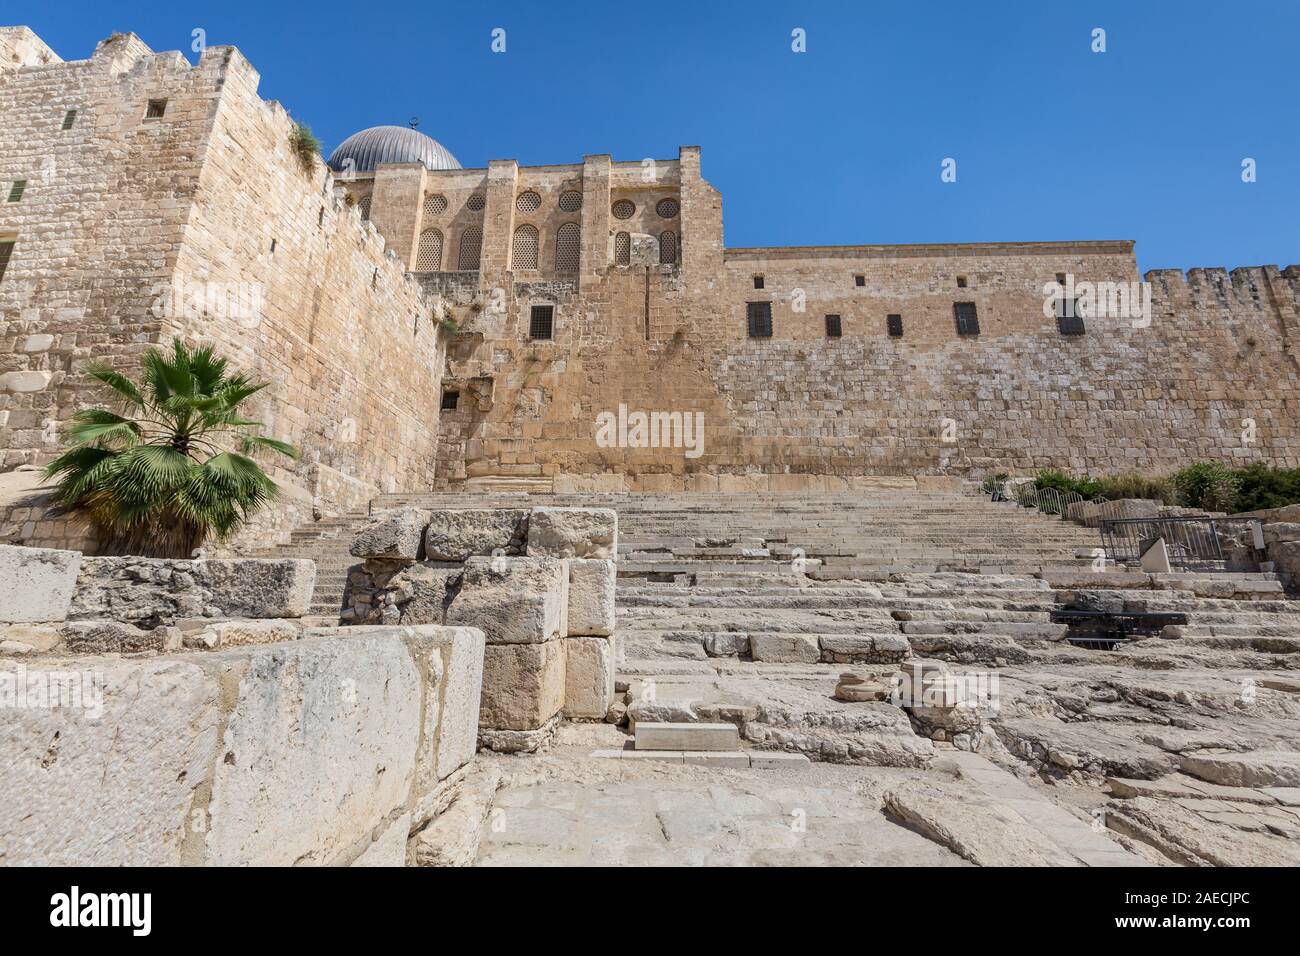 One of the most important findings of the Southern wall excavations is the monumental flight of steps leading up to the second temple mount. Stock Photo